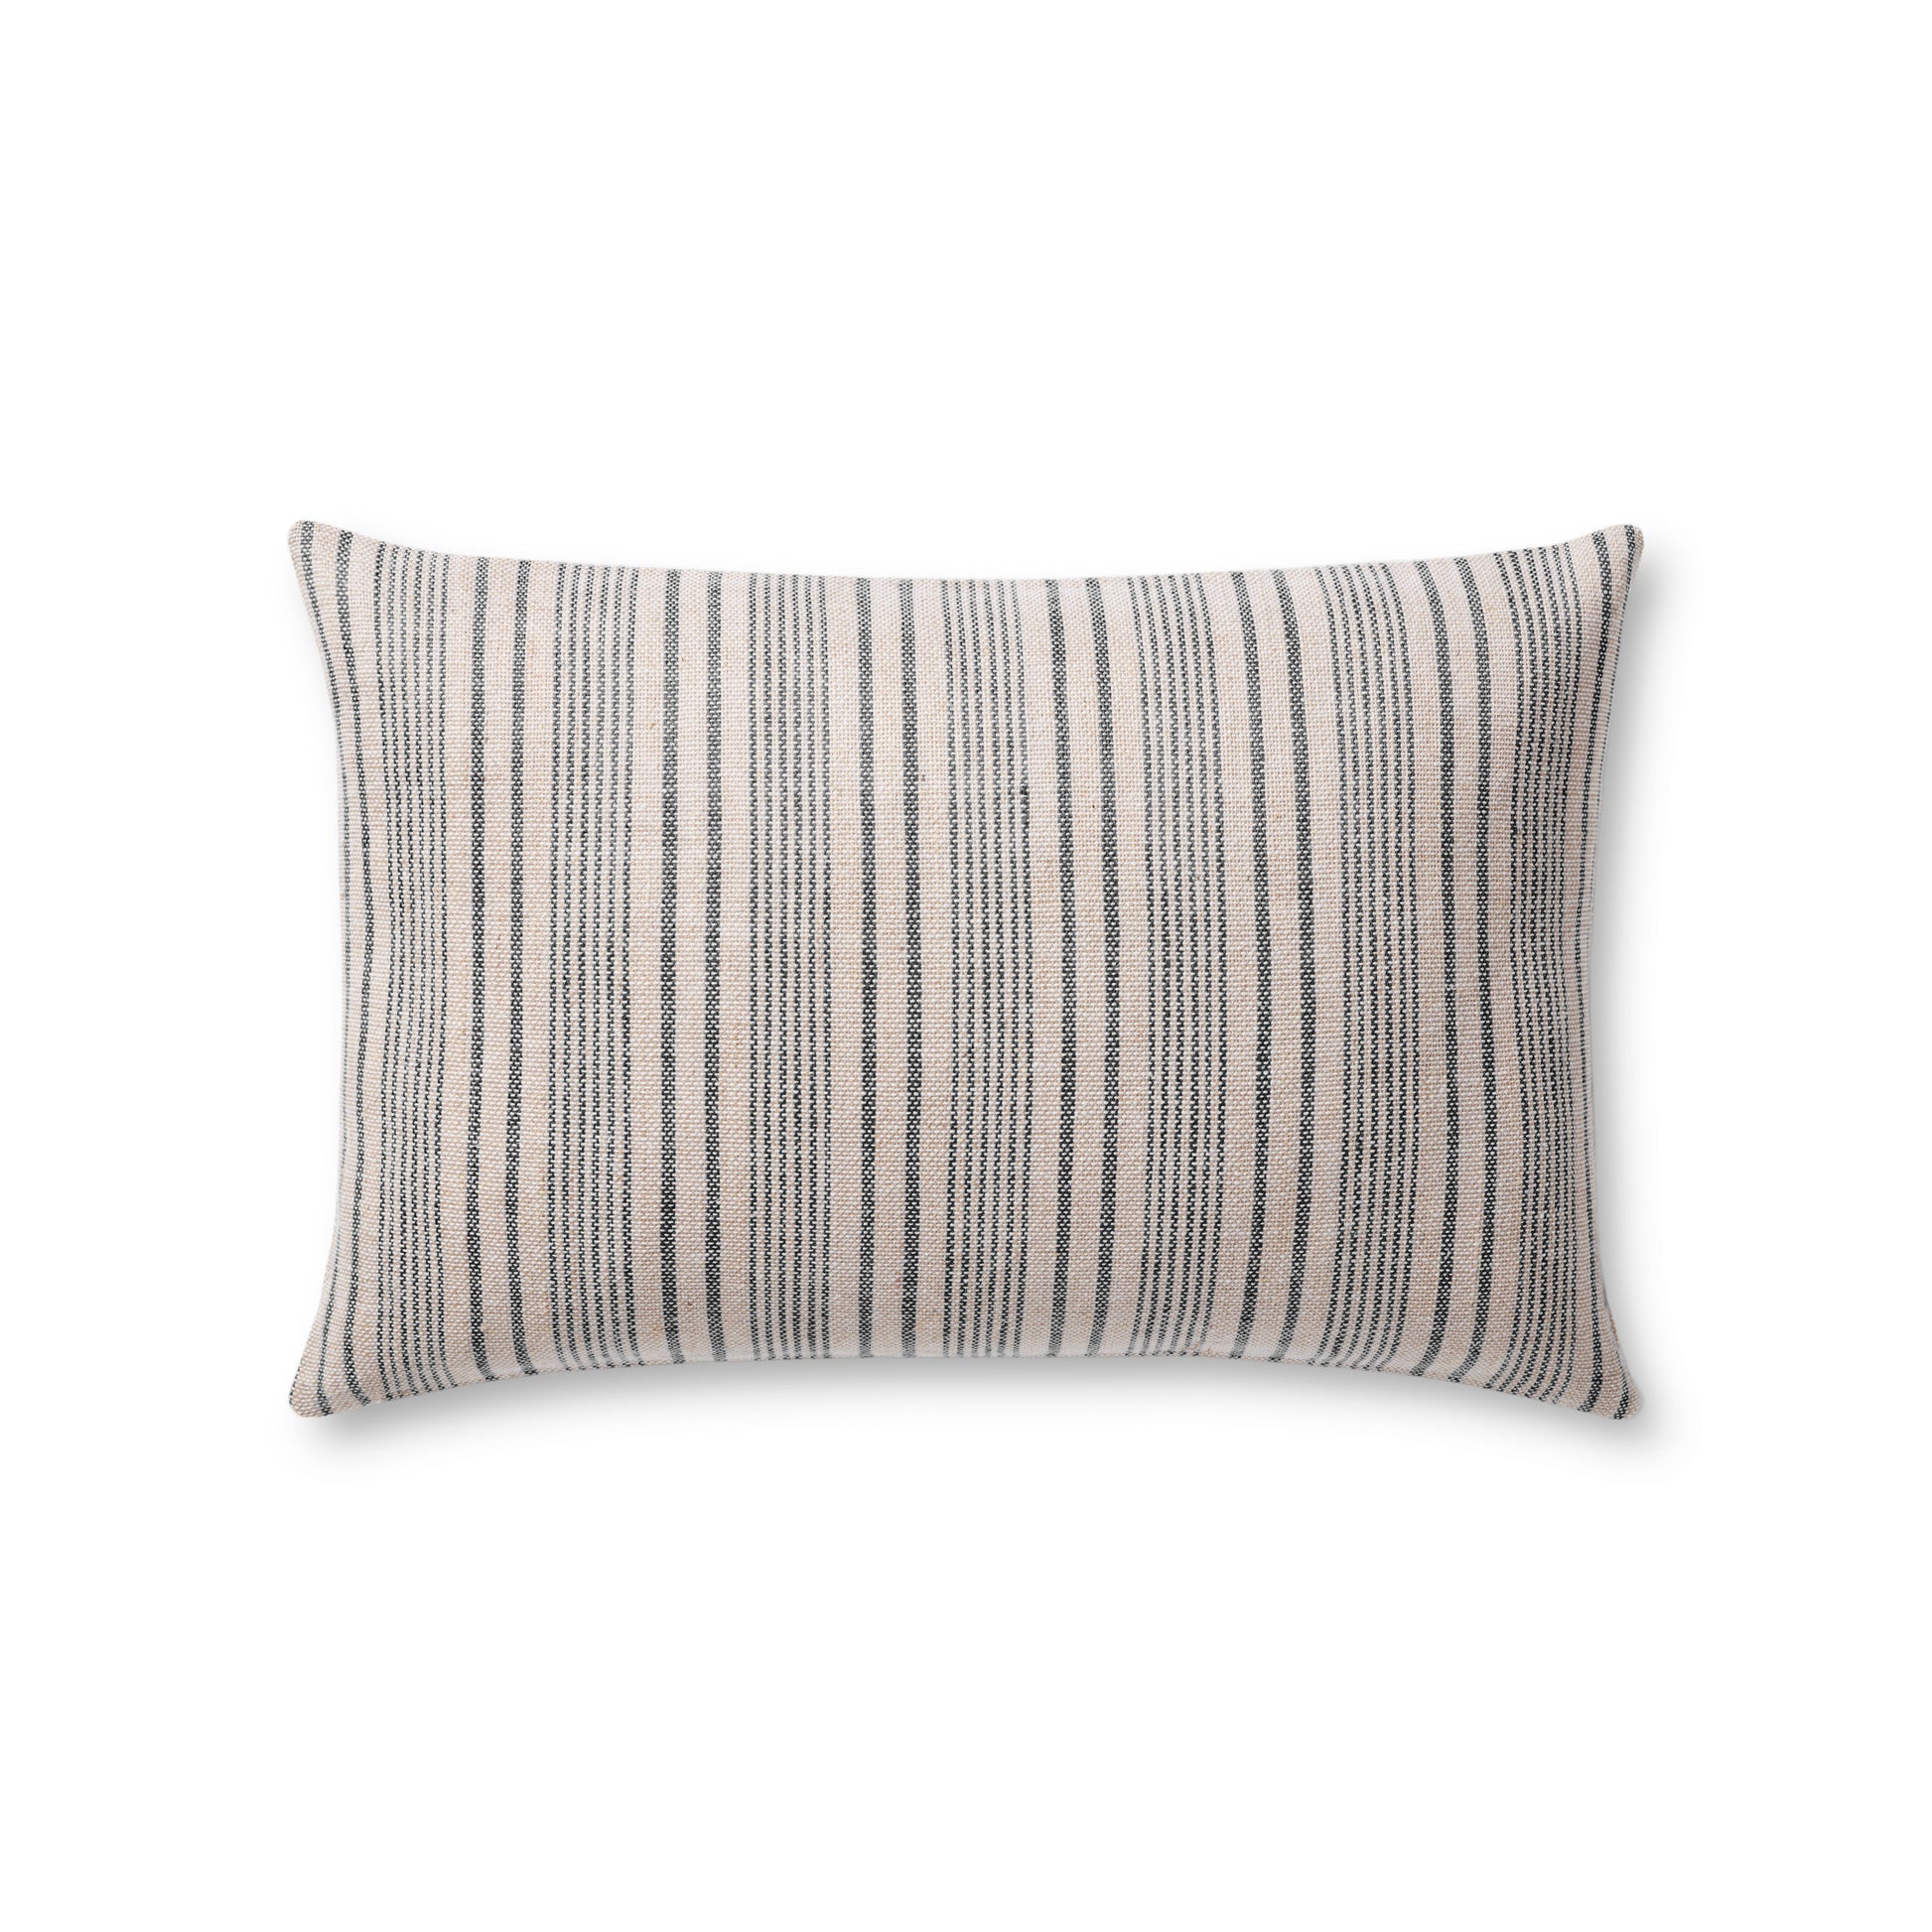 Elaine PMH0031 Jute Indoor Pillow from Magnolia Home by Joanna Gaines x Loloi | Pillow